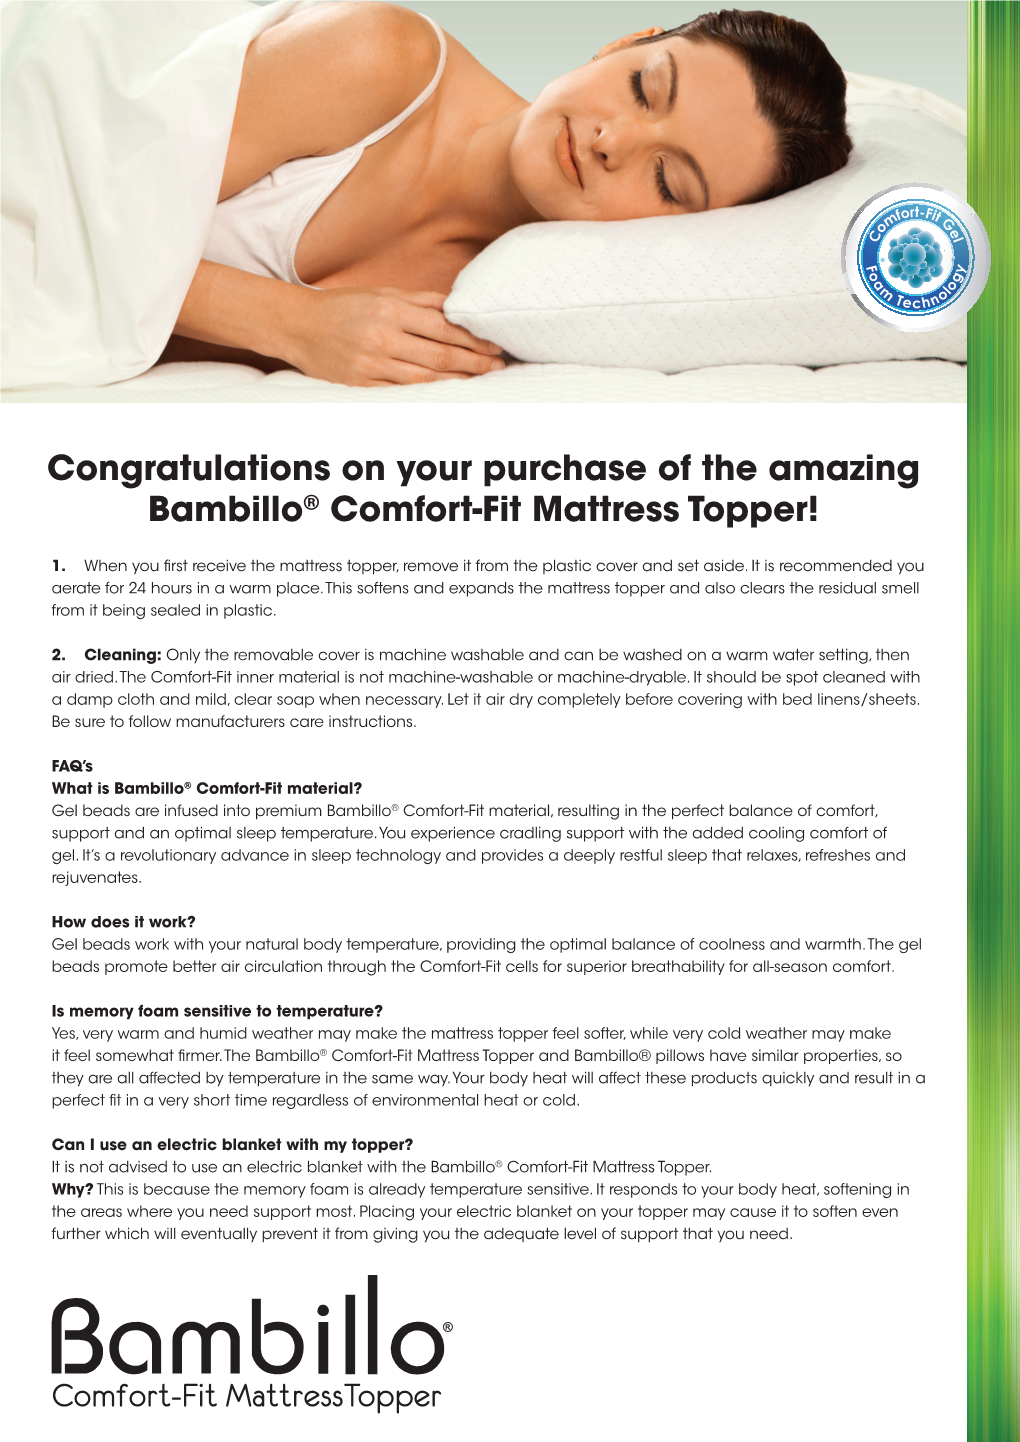 Congratulations on Your Purchase of the Amazing Bambillo® Comfort-Fit Mattress Topper!